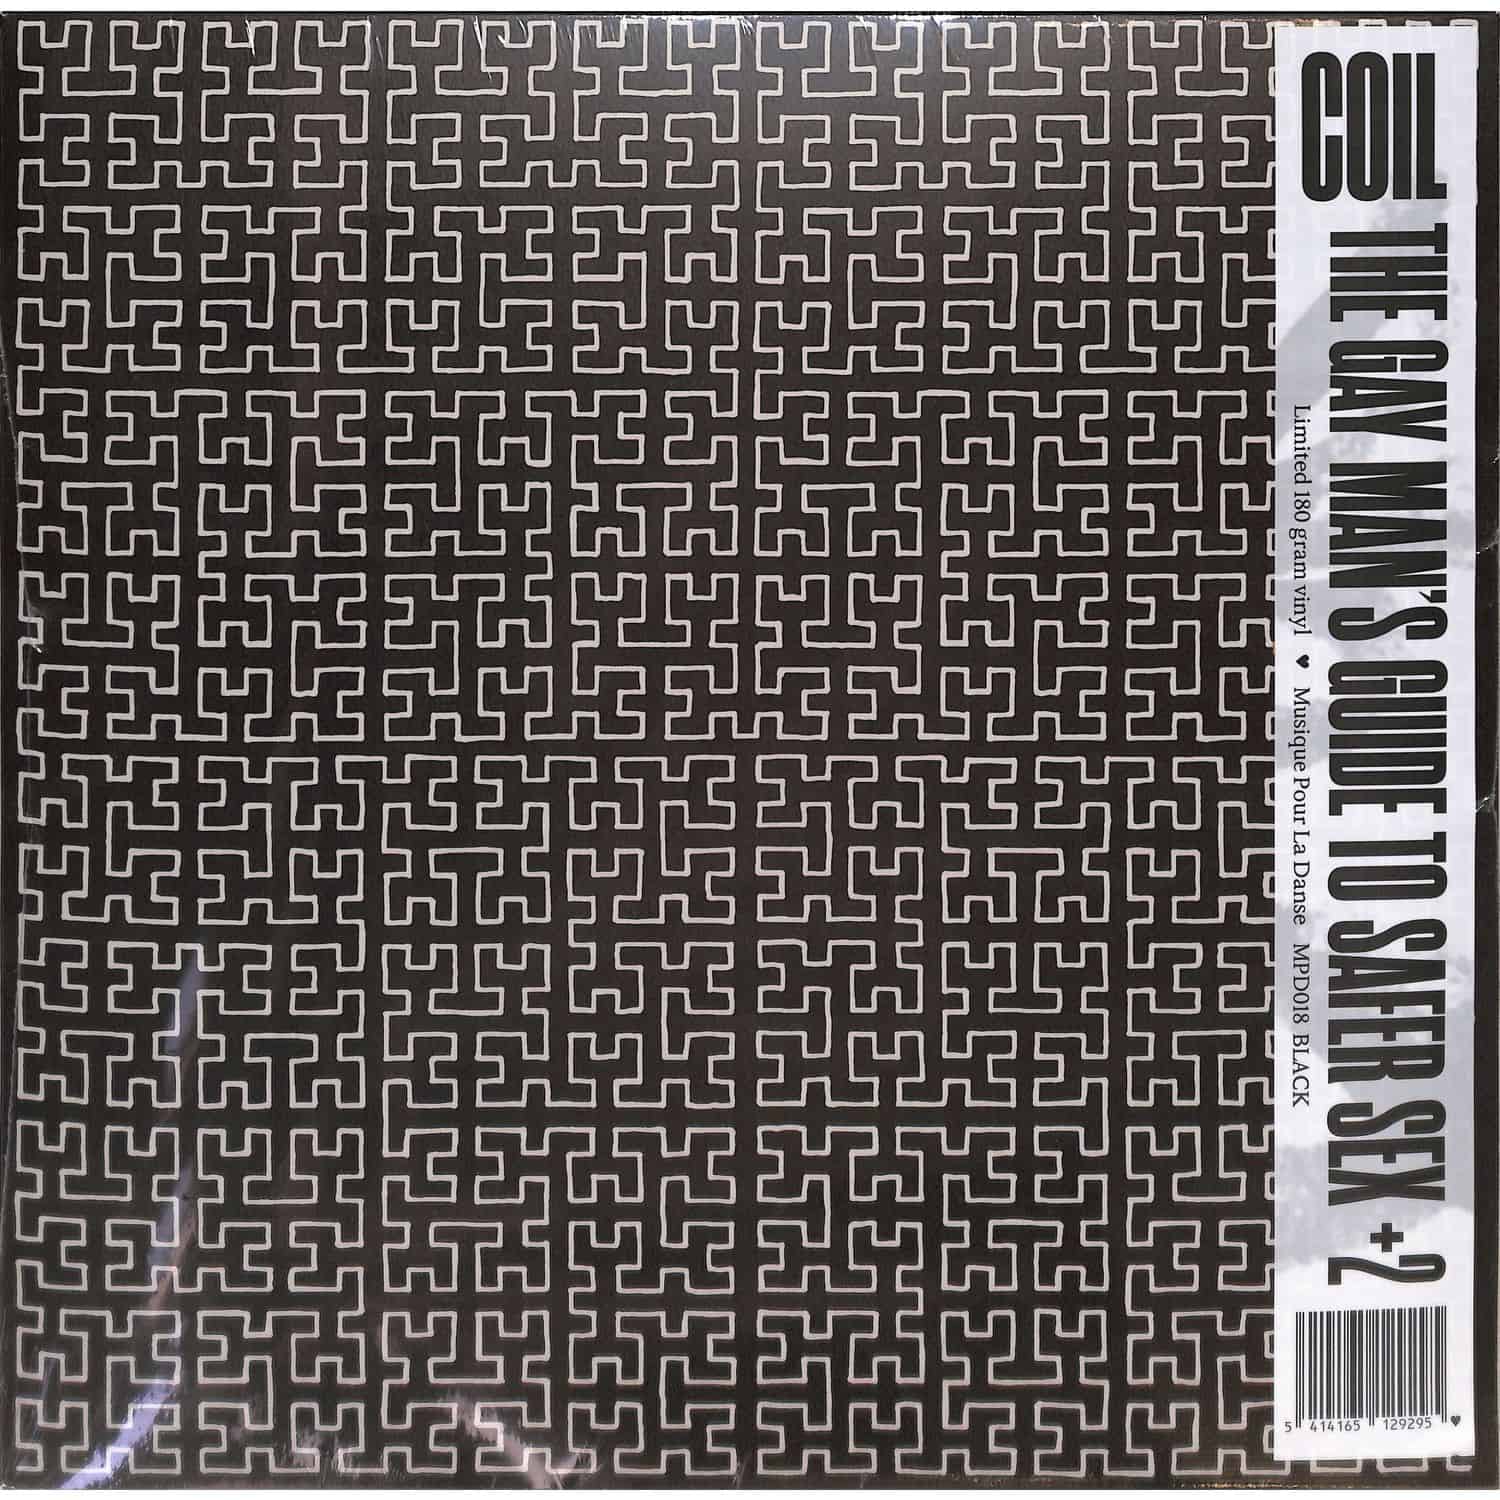 Coil - THEME FROM THE GAY MANS GUIDE TO SAFER SEX 